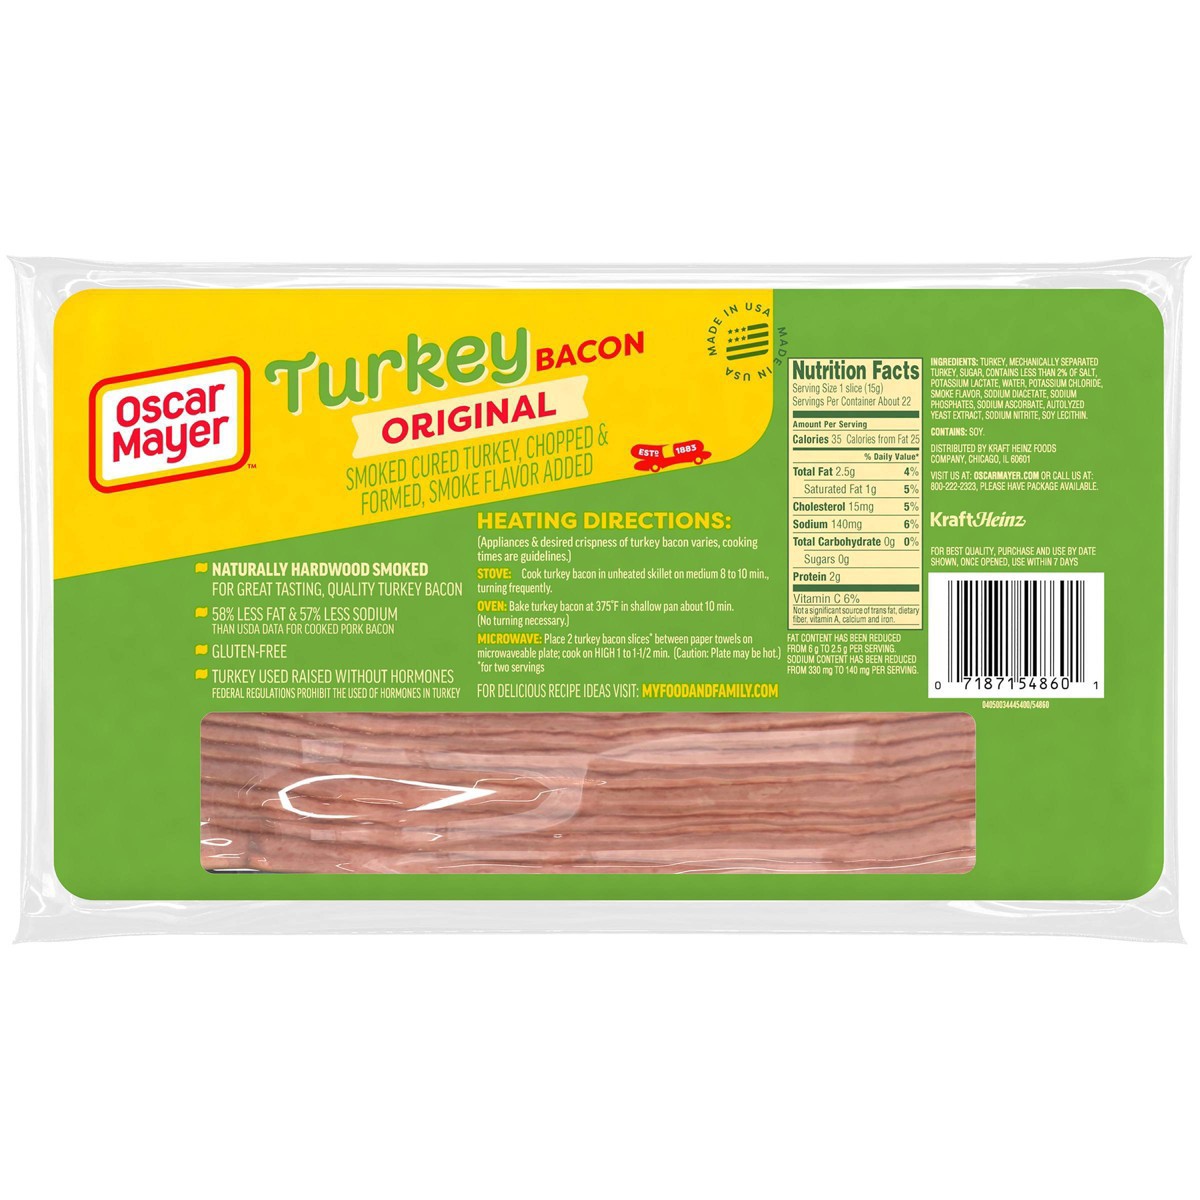 slide 8 of 20, Oscar Mayer Fully Cooked & Gluten Free Turkey Bacon with 58% Less Fat & 57% Less Sodium Pack, 21-23 slices, 12 oz